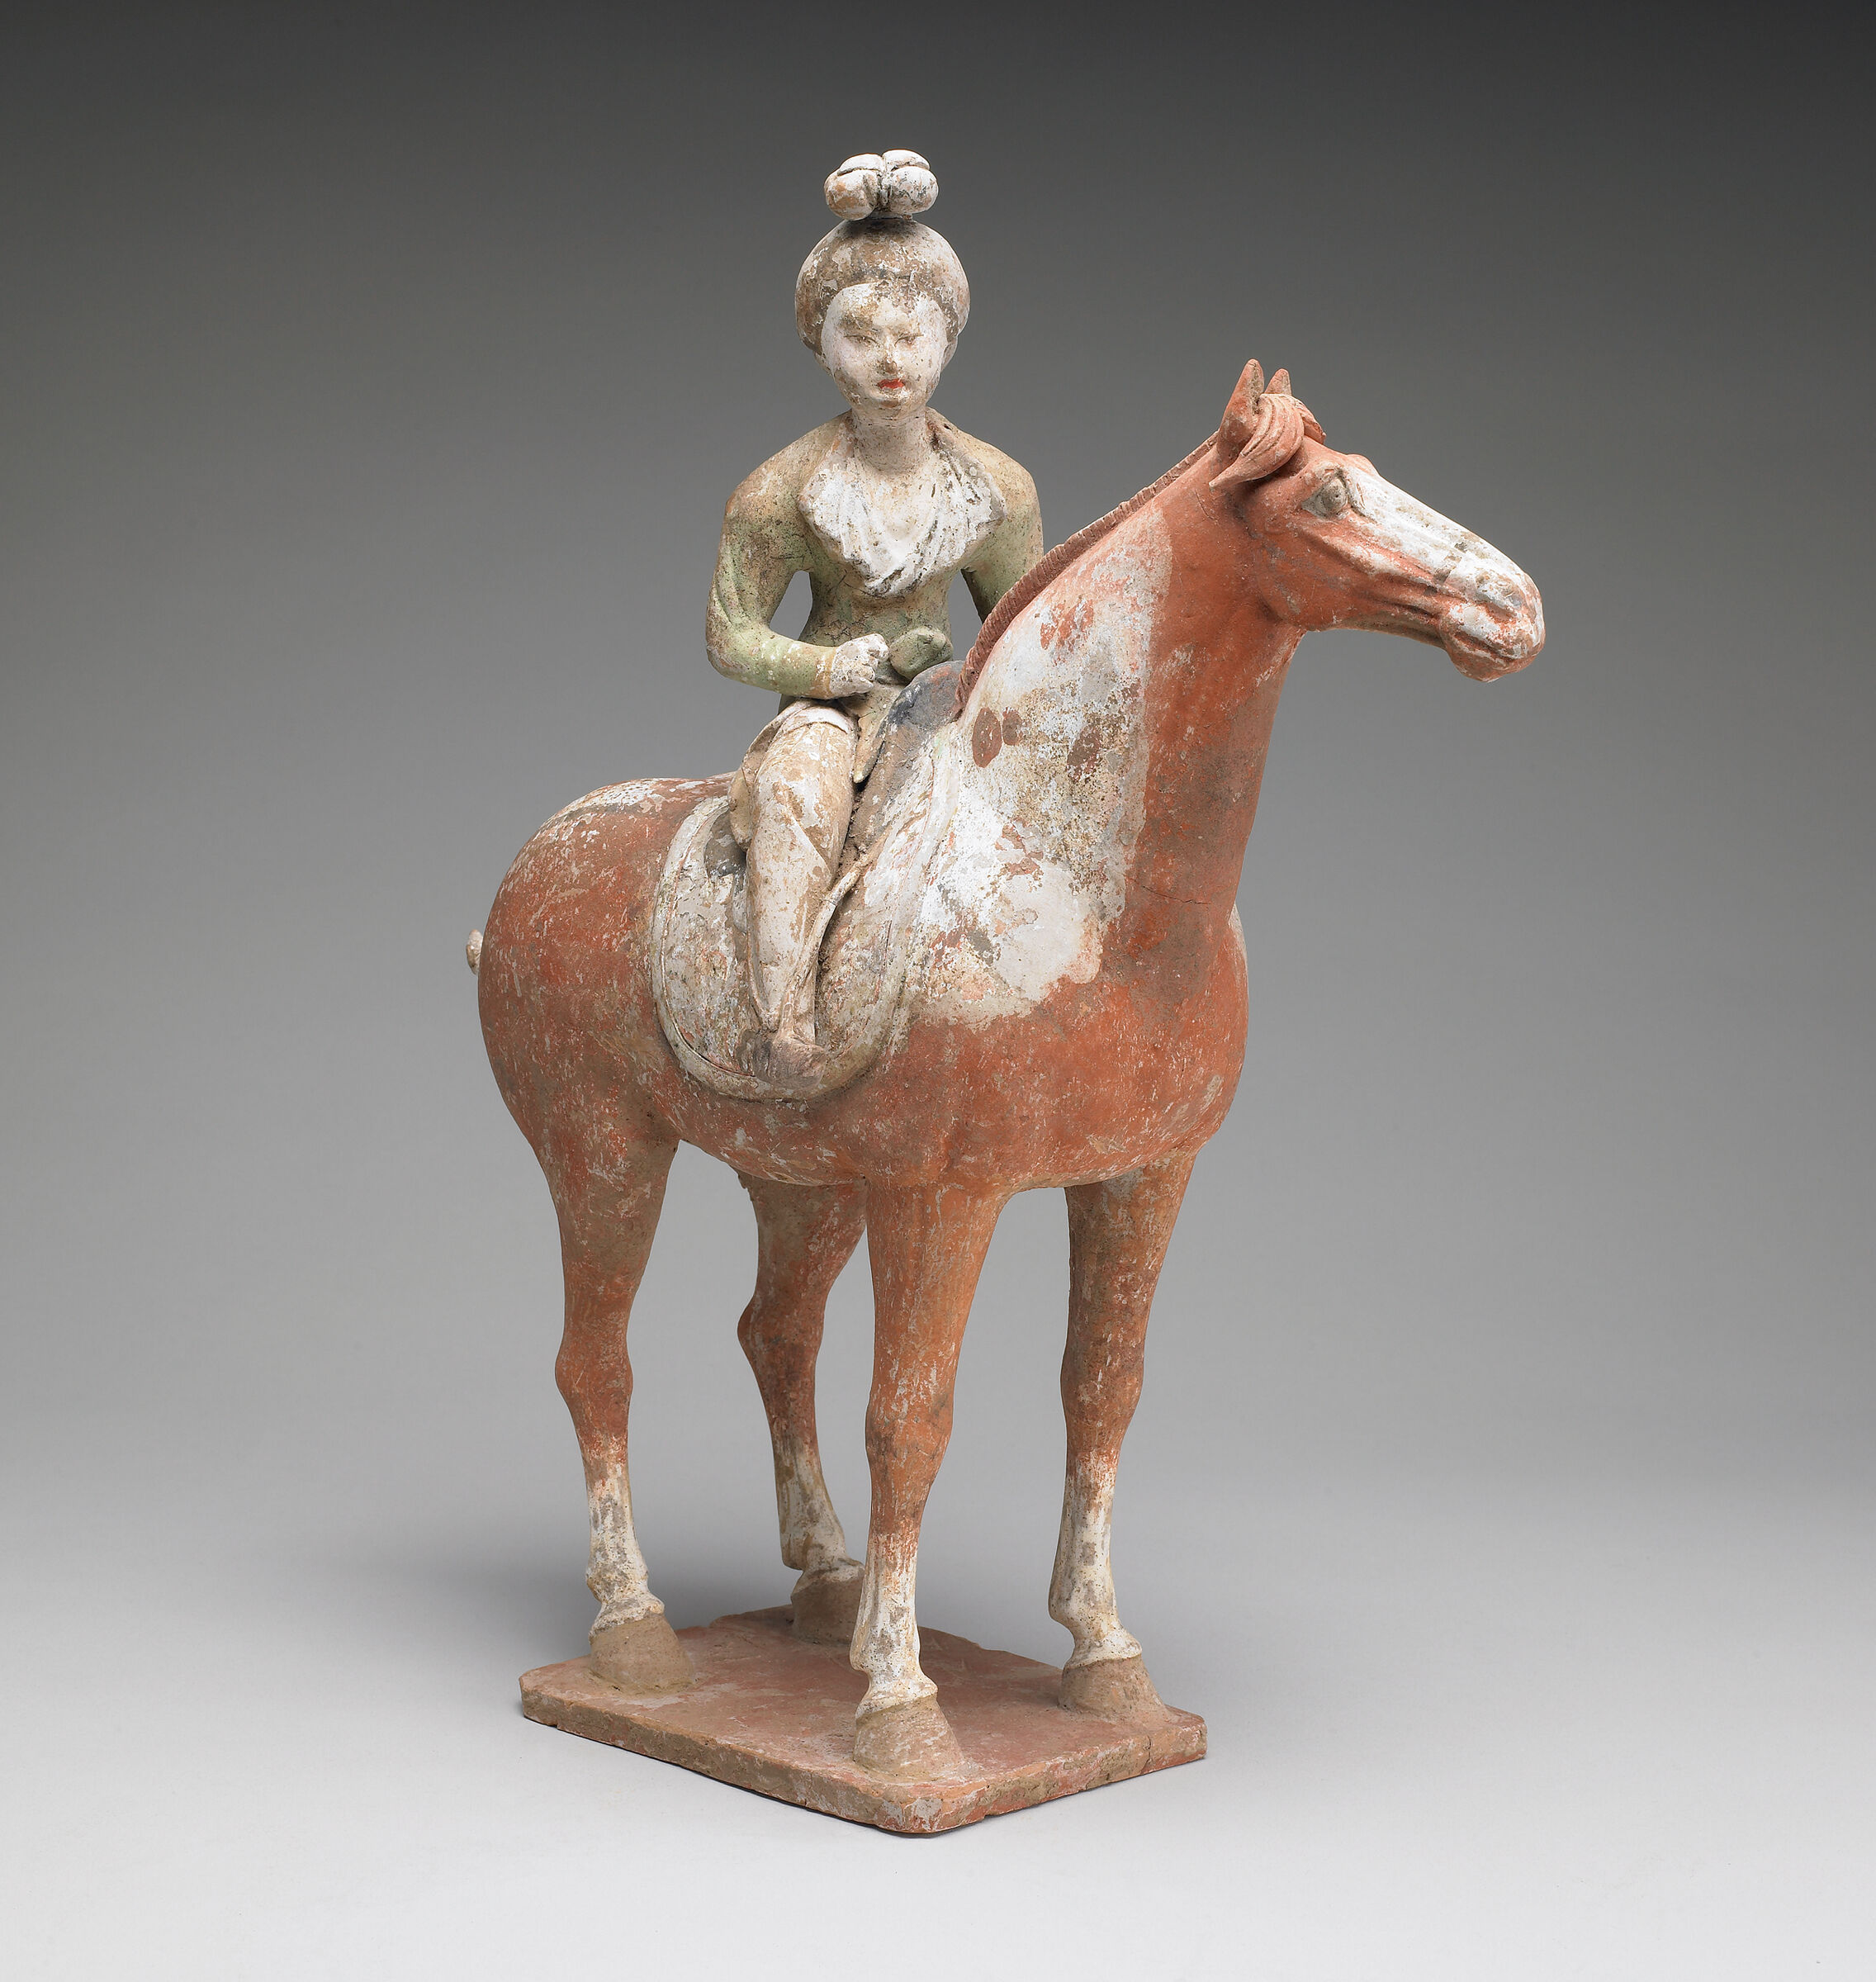 Equestrian Female, From The Tomb Sculpture Set: Two Equestrian Figures, One Male With A Tall, Elaborately Embellished Hat, One Female With Hair In A Topknot, Both With Pointed Boots, And Hands Positioned To Hold The Reins Of Their Standing, Saddled Horses